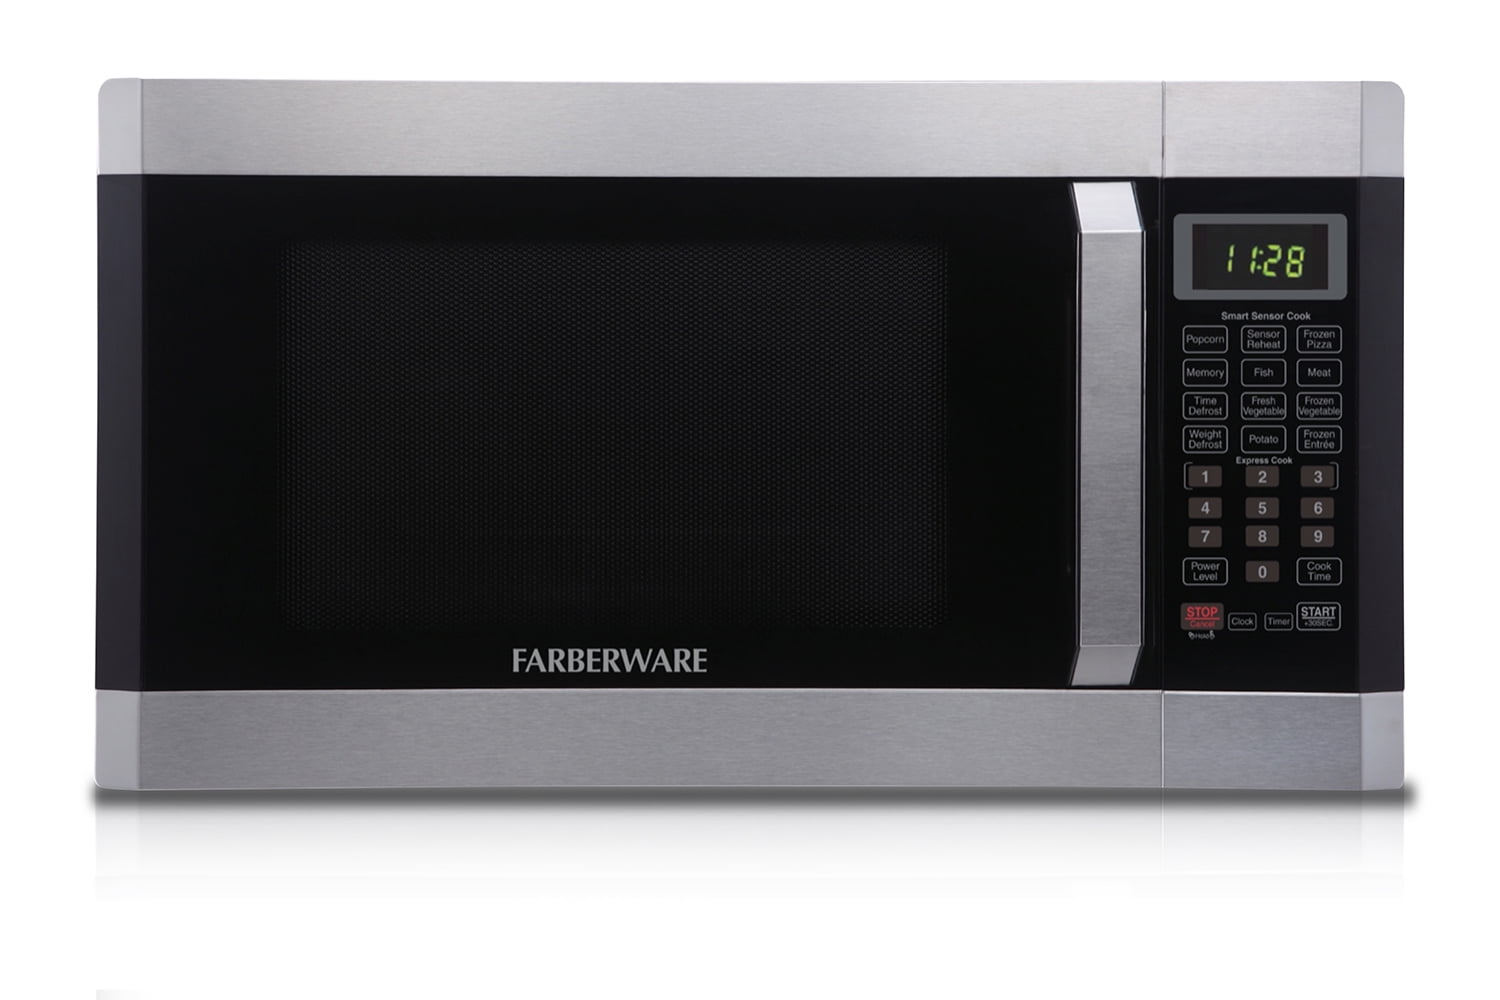 1.2 cu. ft. 1000-Watt Commercial Counter Top Microwave Oven in Stainless  Steel Interior and Exterior, Programmable